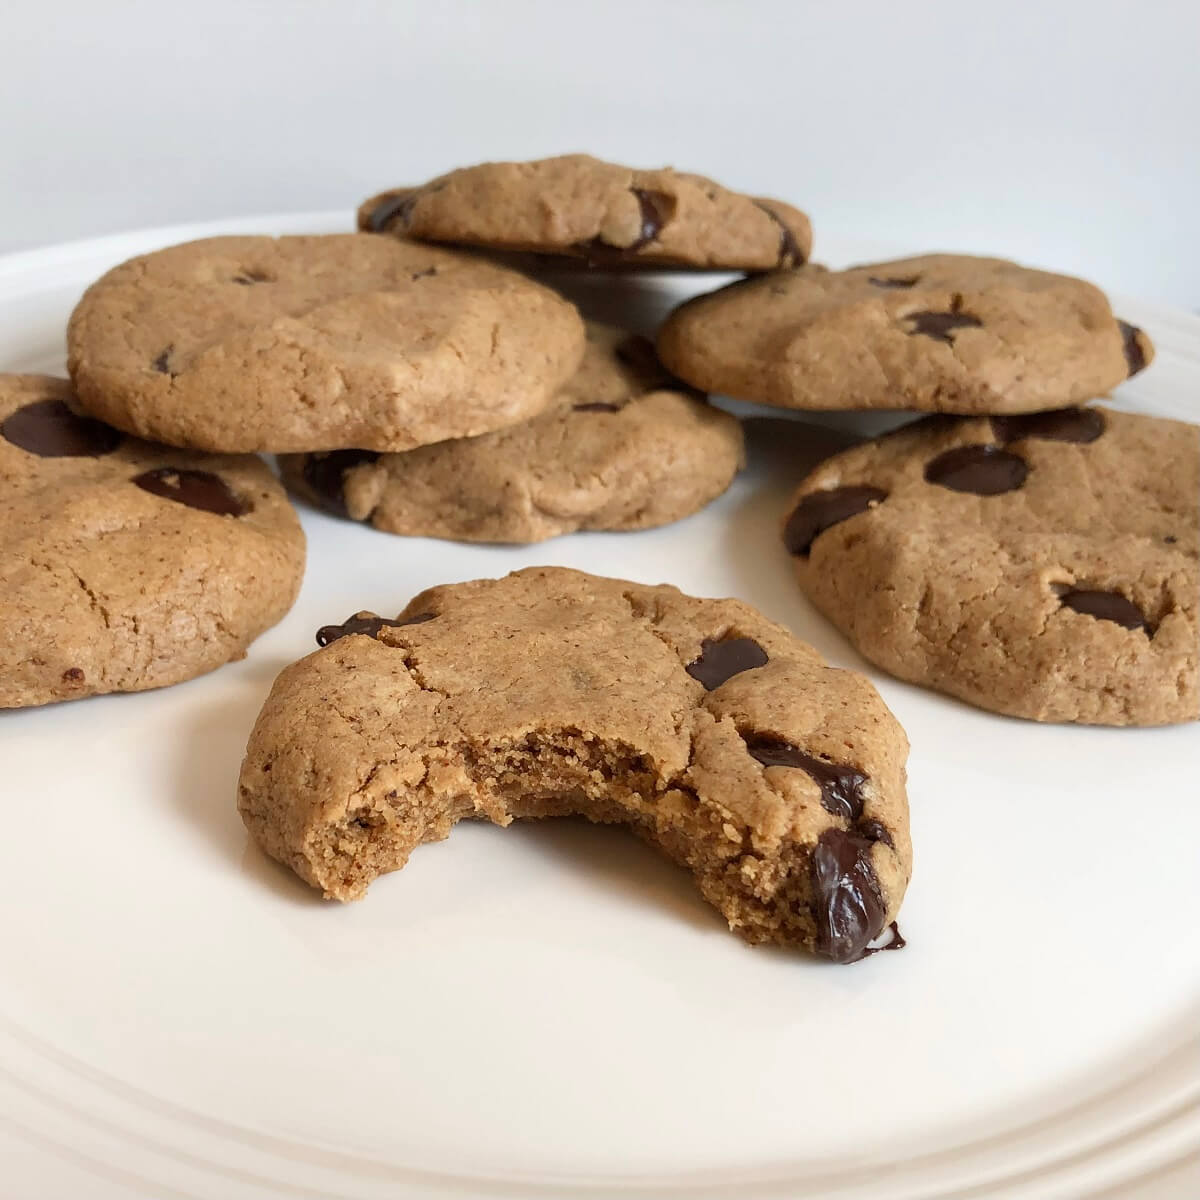 Maple syrup chocolate chip cookies piled on a white plate with a bite missing from one.